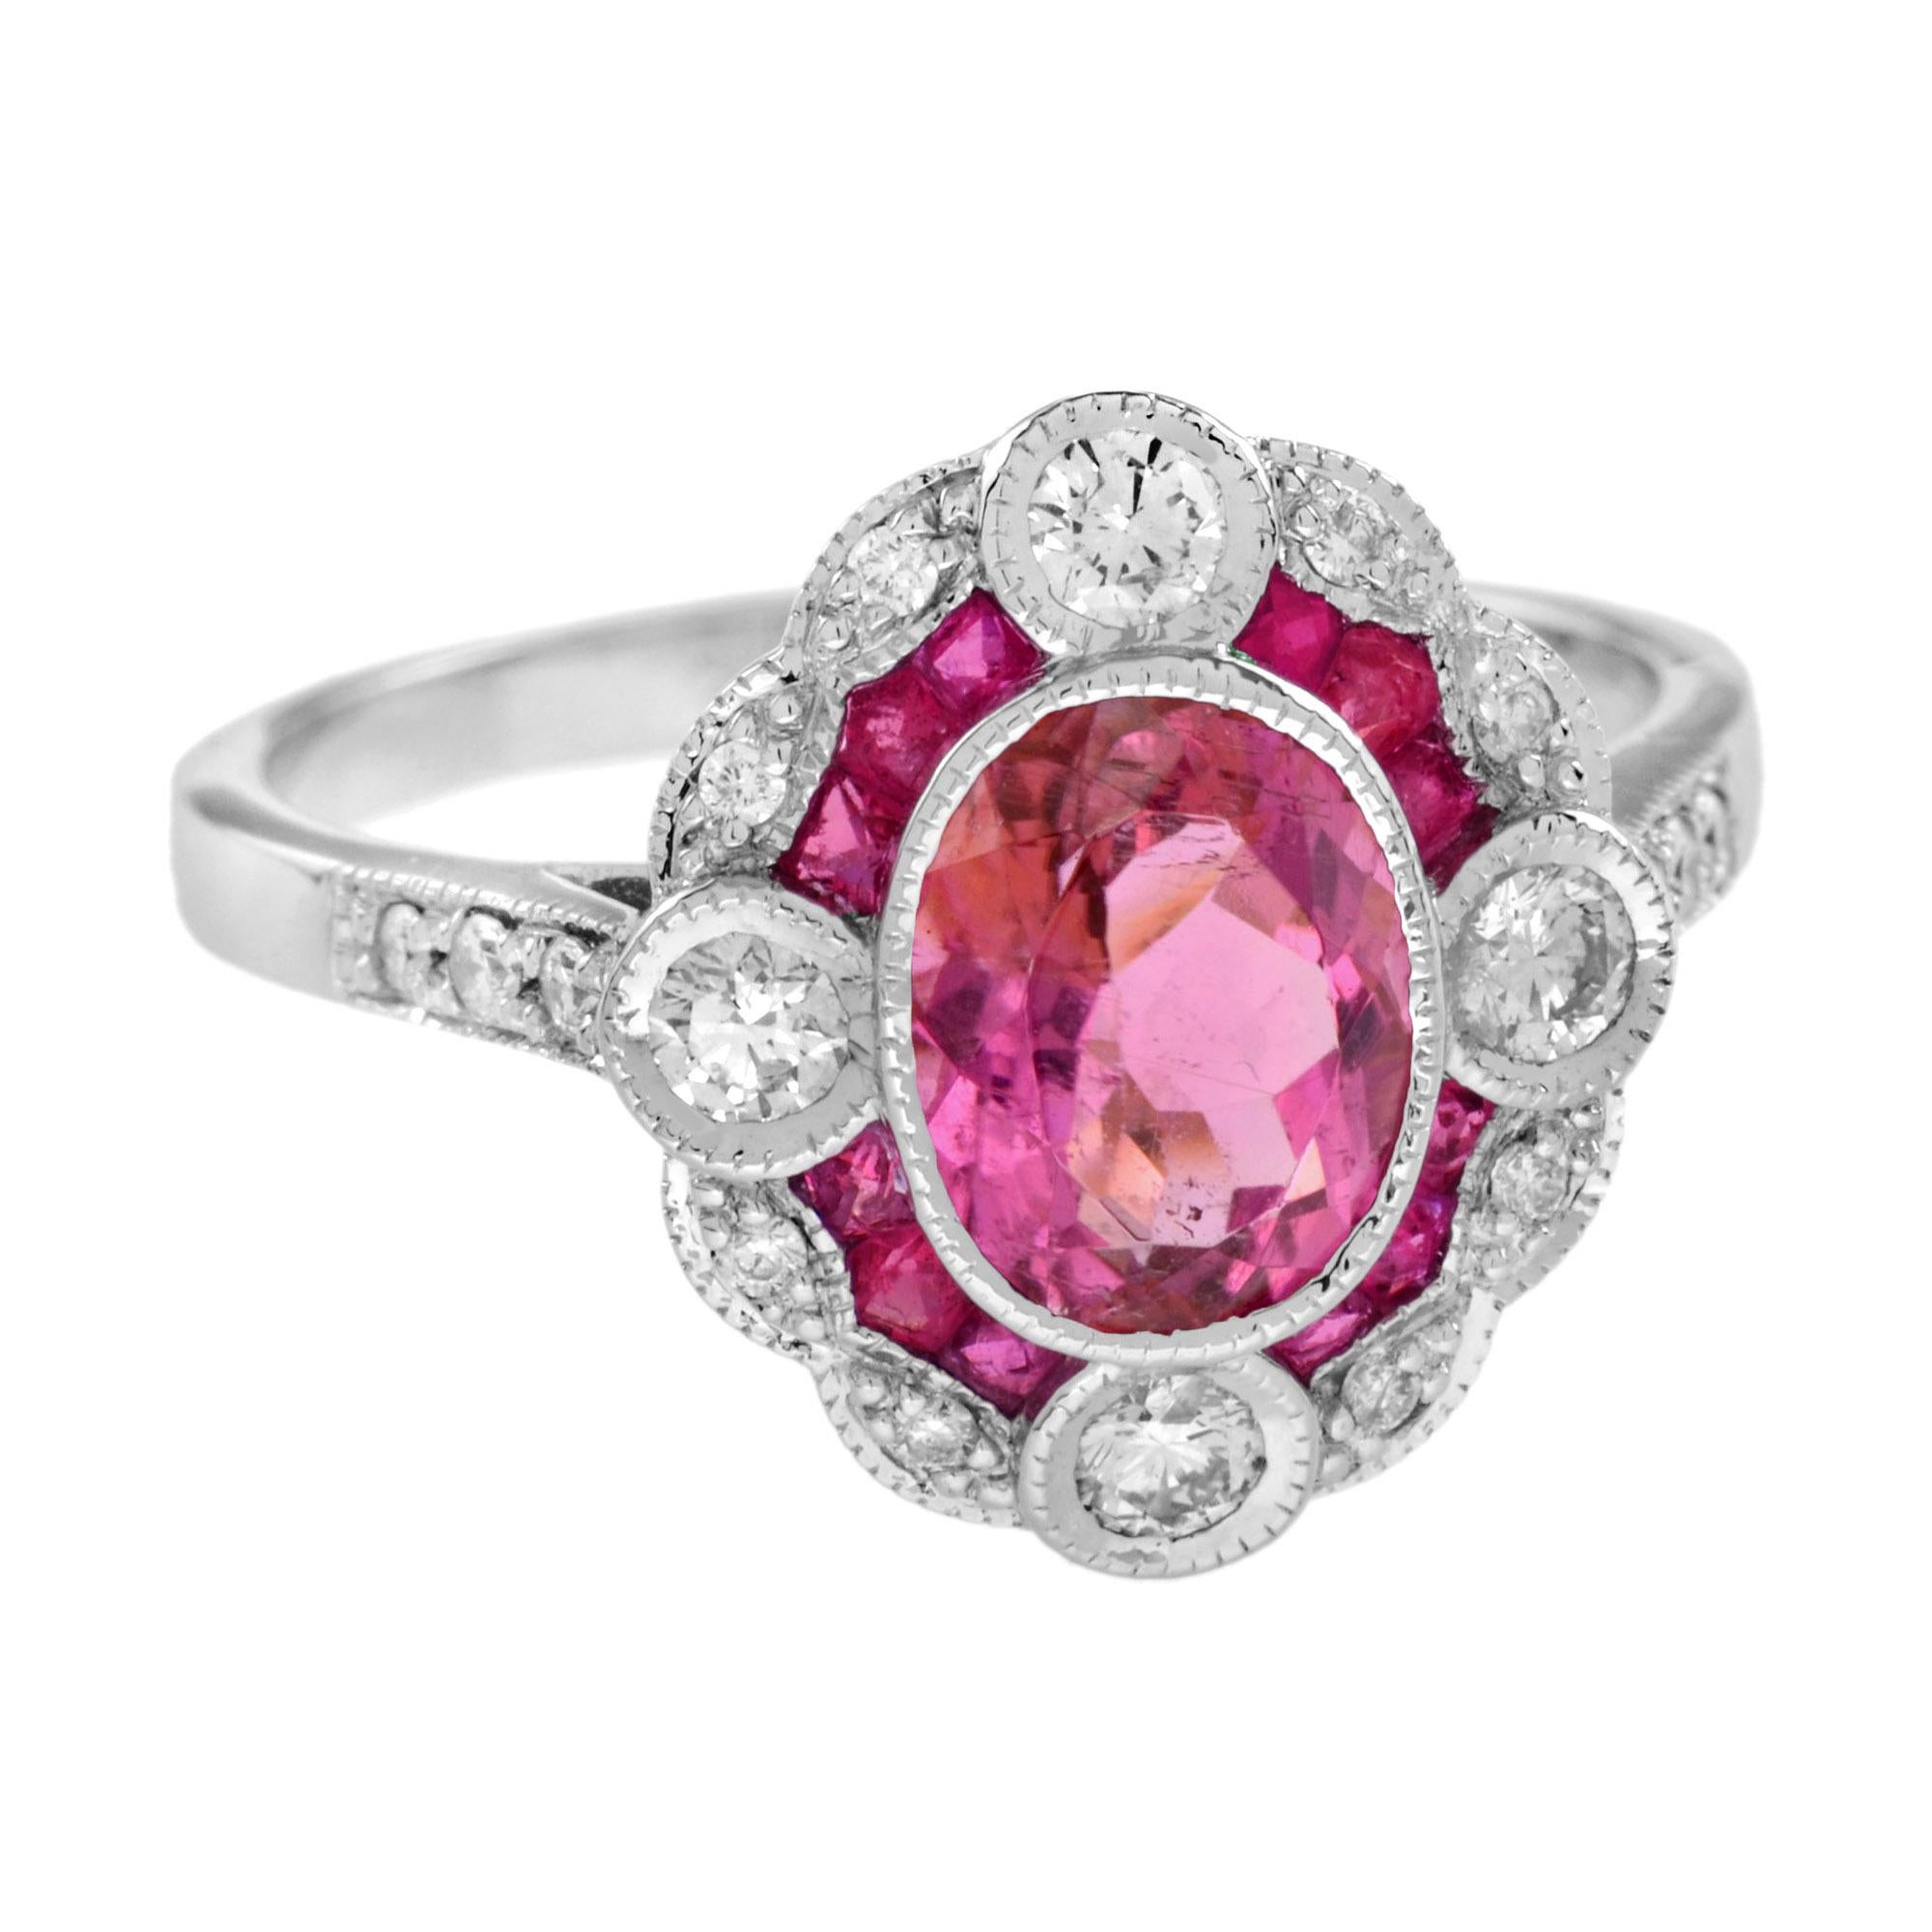 Oval Cut Pink Tourmaline Ruby Diamond Art Deco Style Engagement Ring in 18K White Gold For Sale